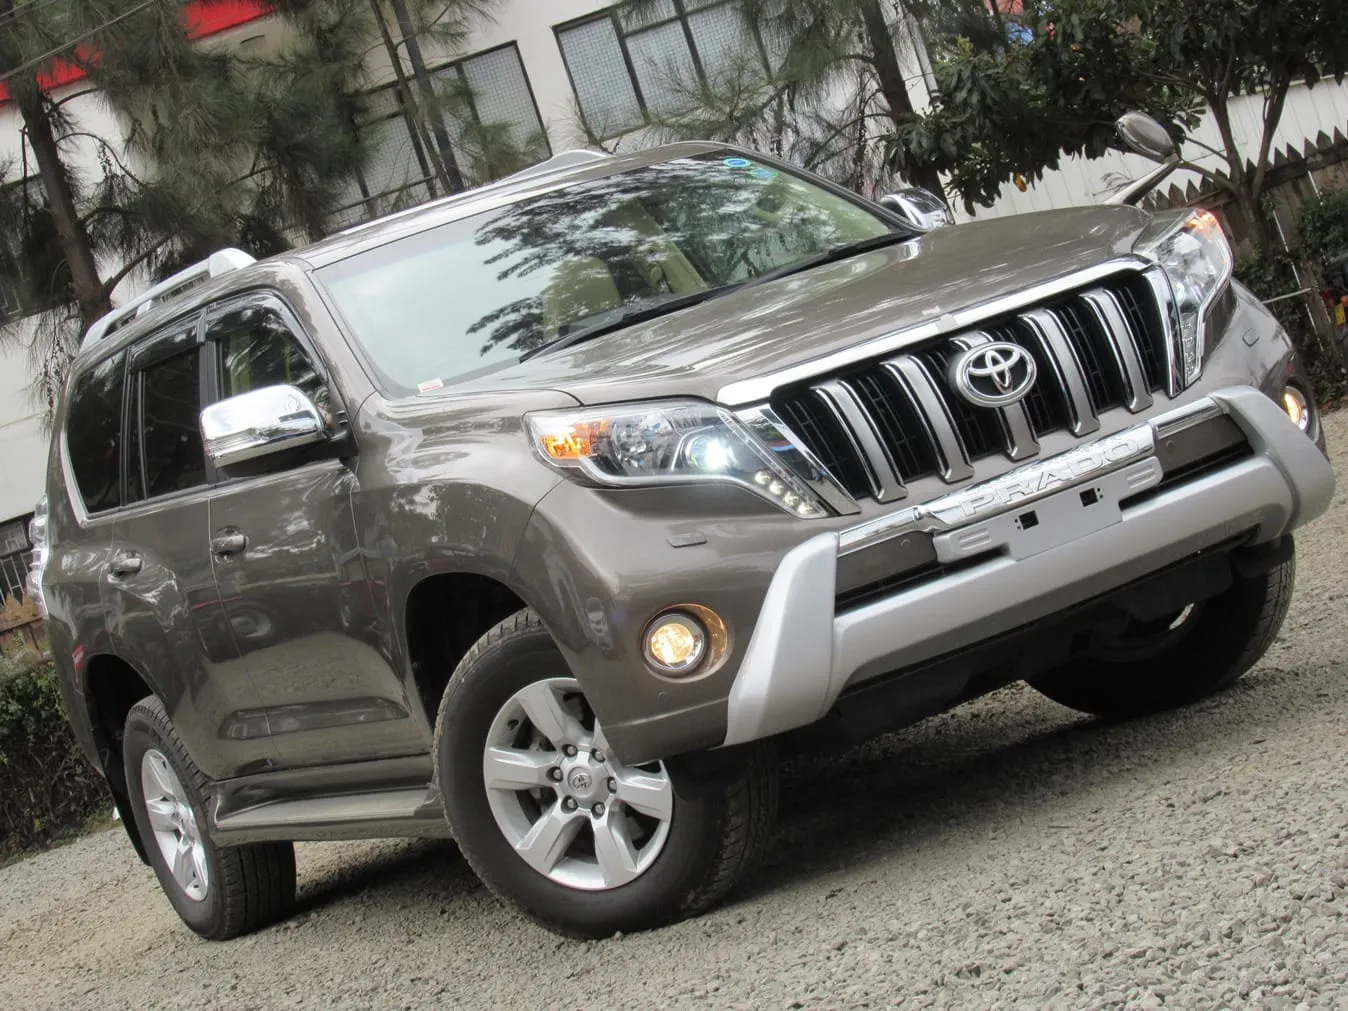 Cars Cars For Sale/Vehicles SUV-Bronze 2016 Toyota Prado Sunroof leather Diesel Trade in bank finance Ok New 11